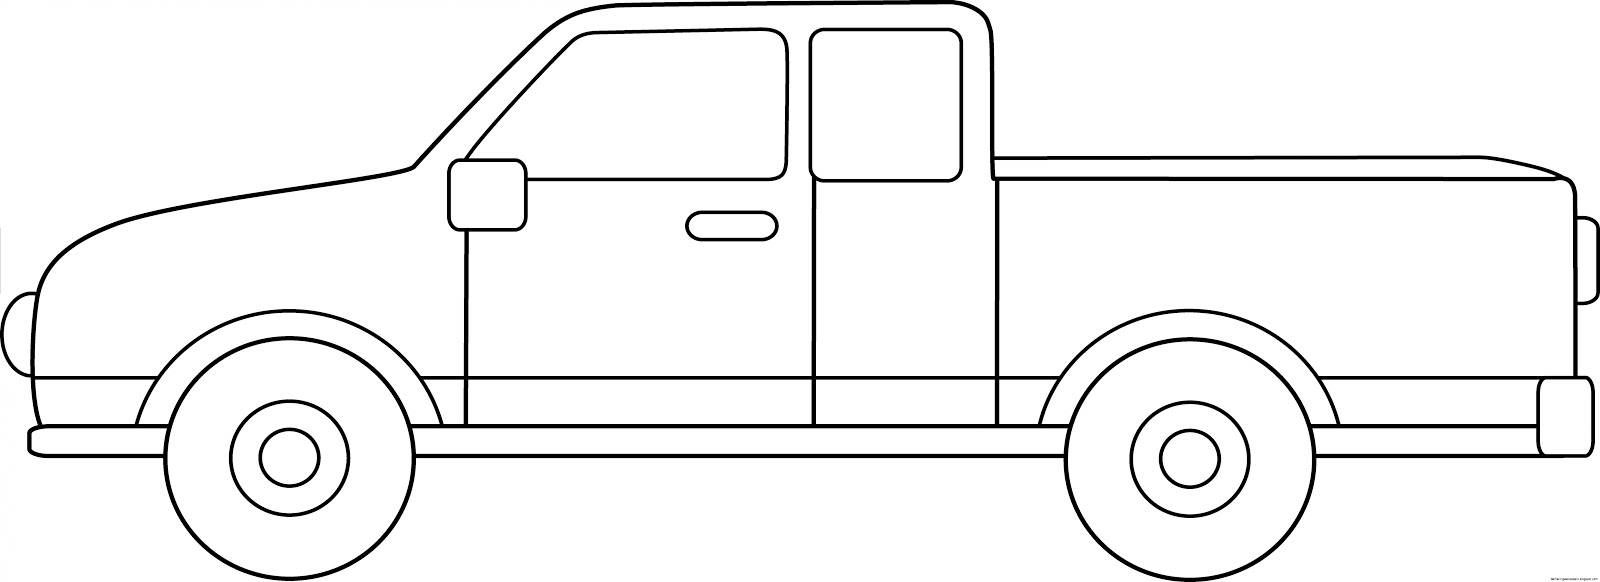 Pick up truck clipart black and white